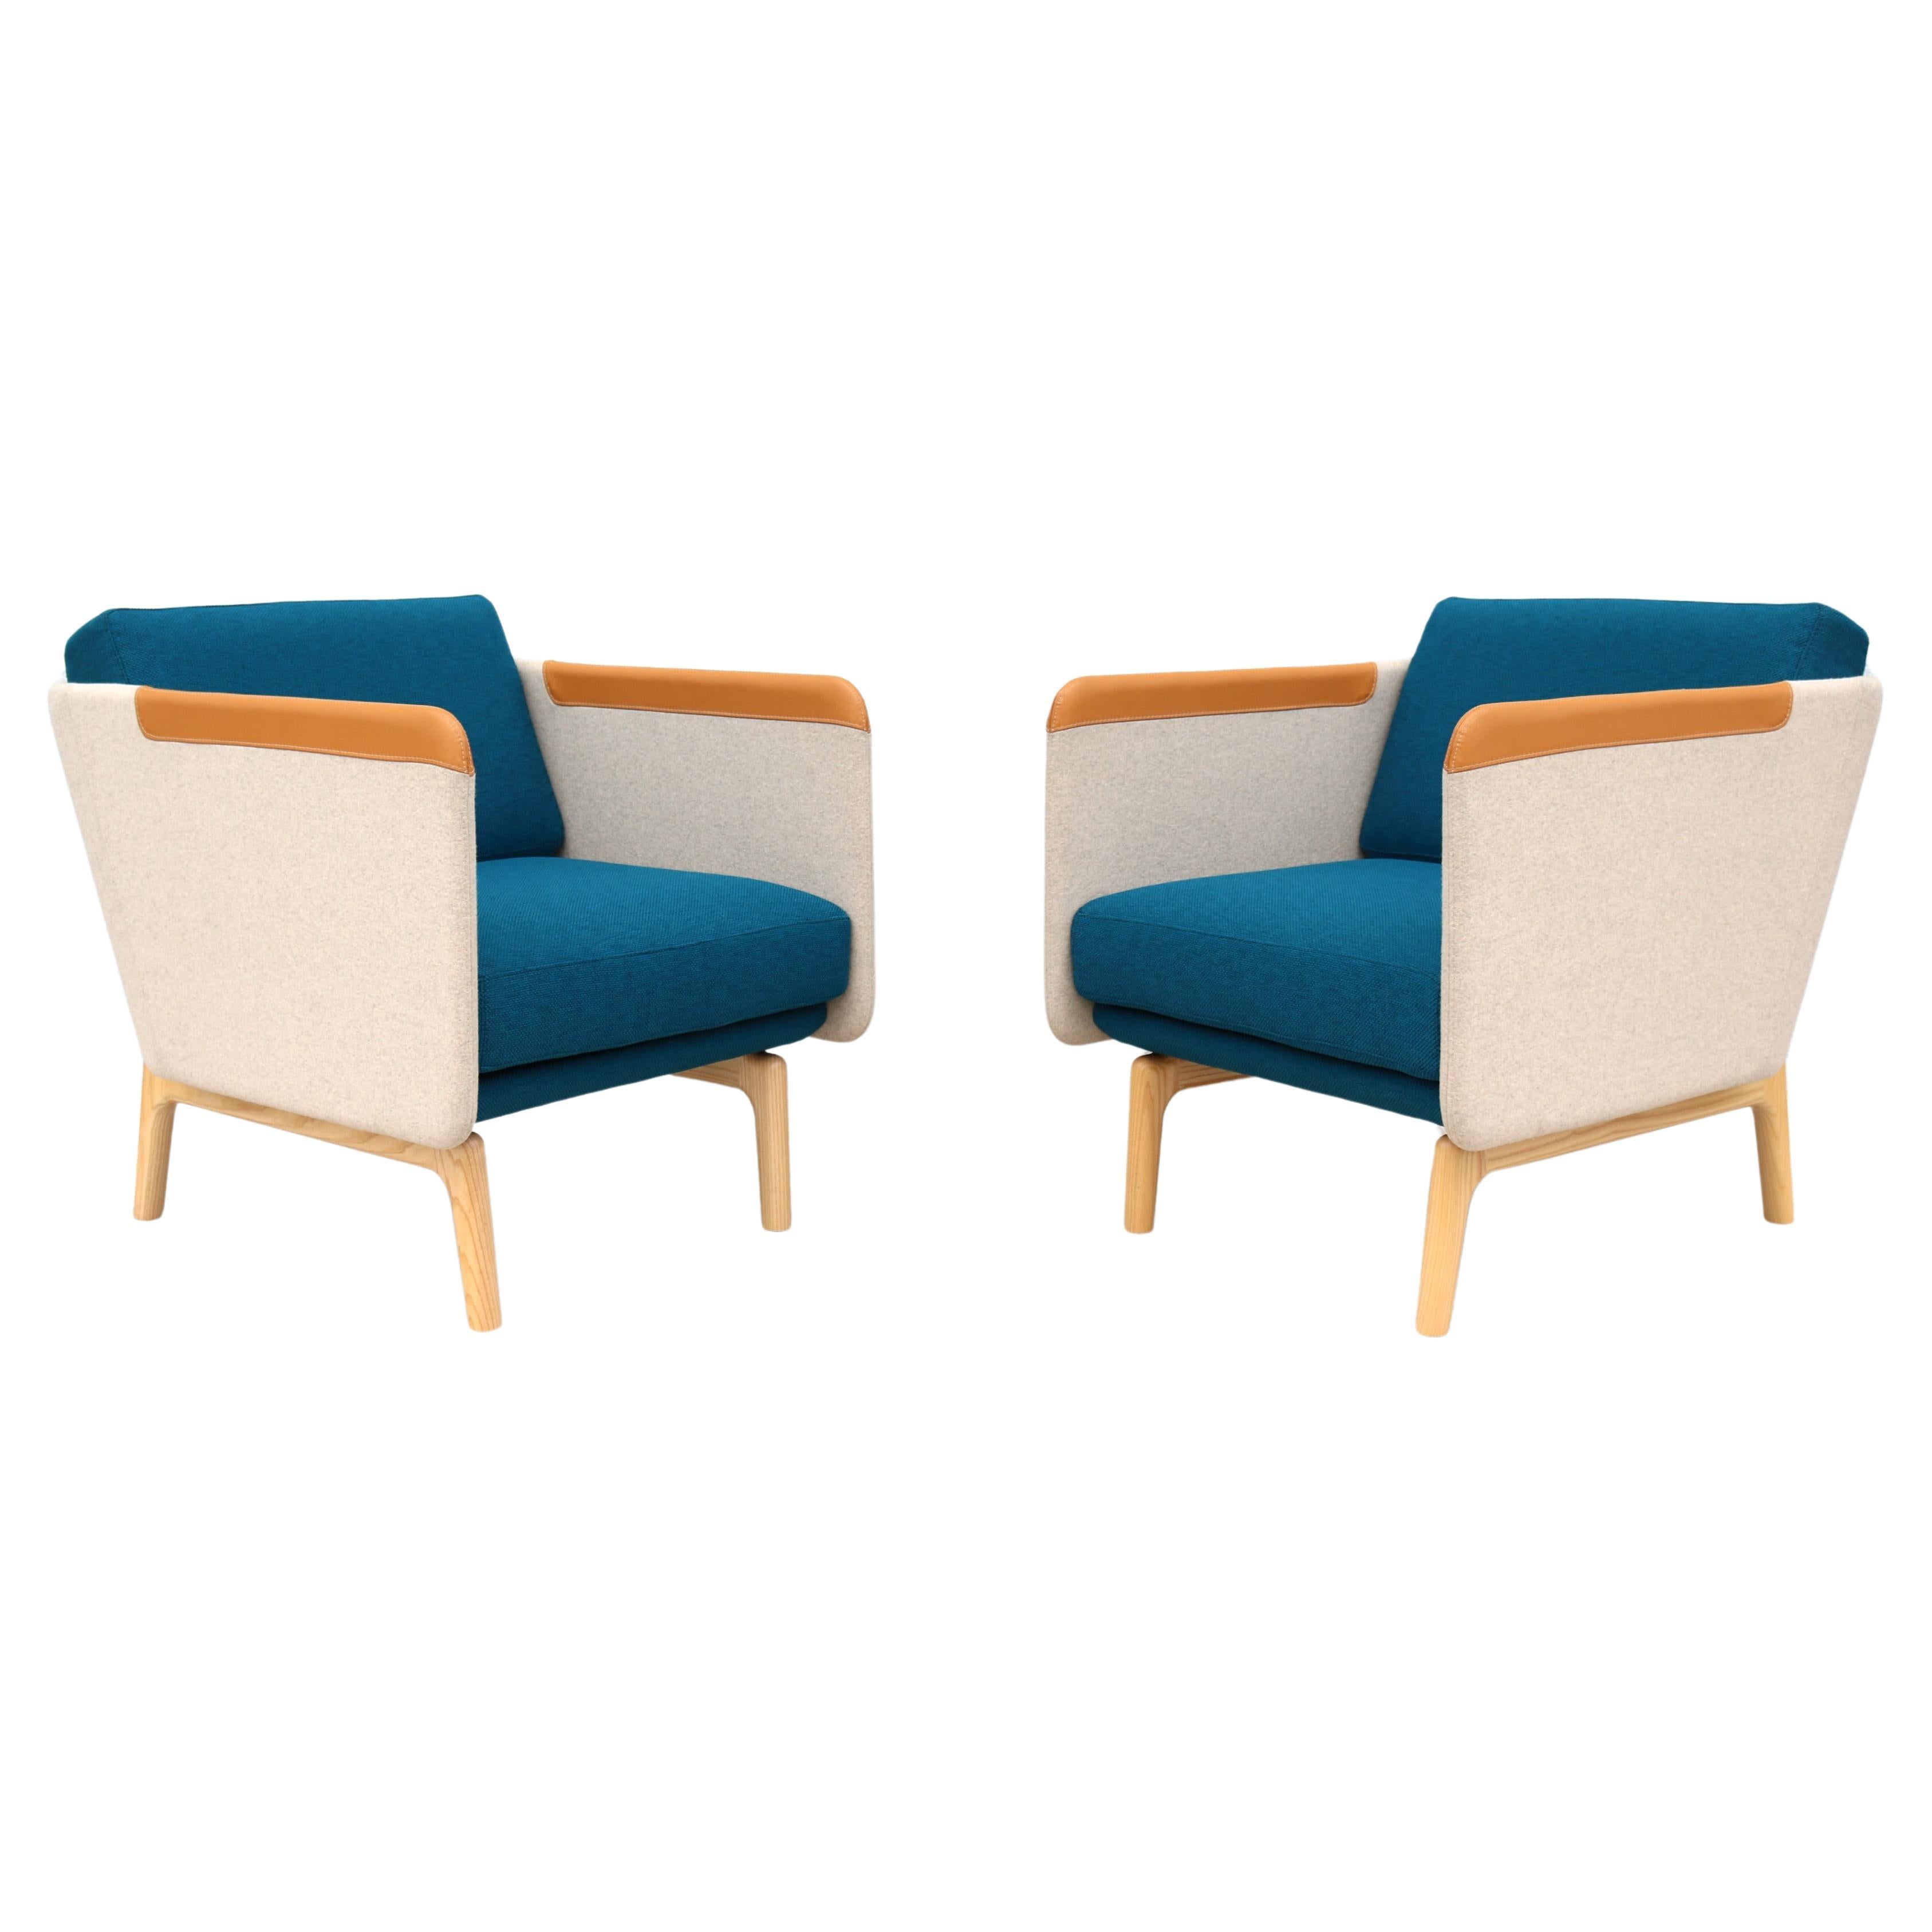 Contemporary Modern Roger Webb for OFS Heya Wool Lounge Chairs - a Pair For Sale